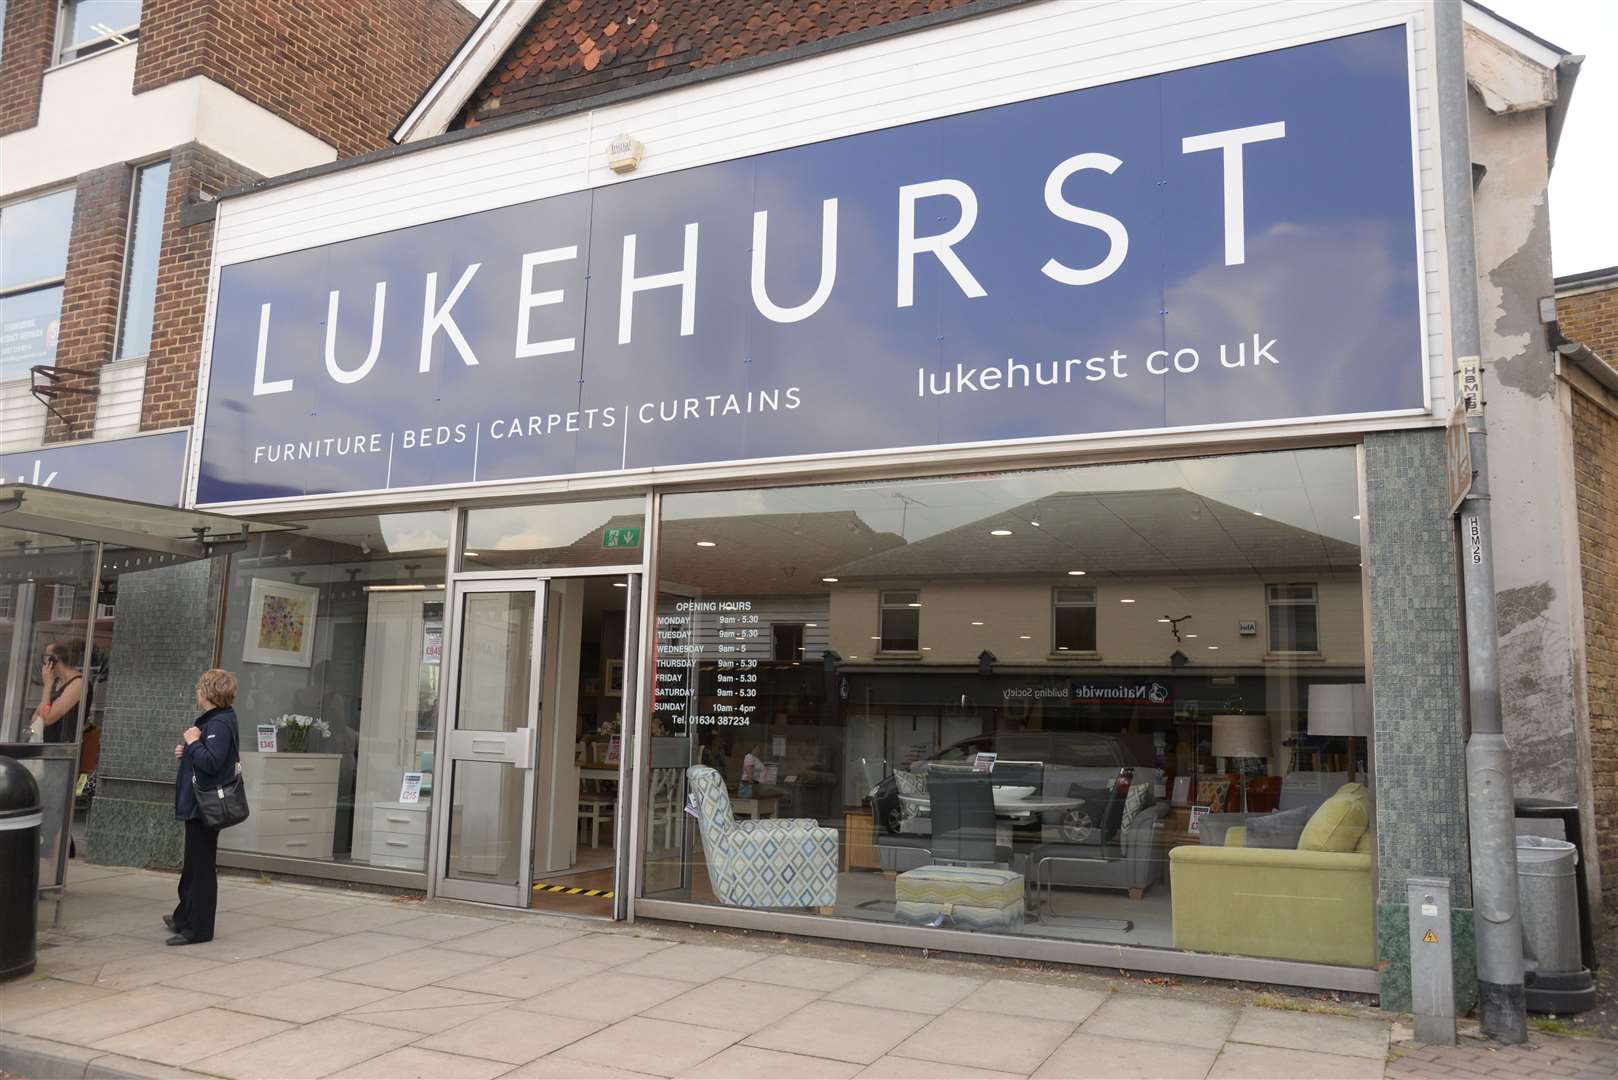 Lukehurst's flagship store in Rainham - and this month the firm marks its 50th anniversary